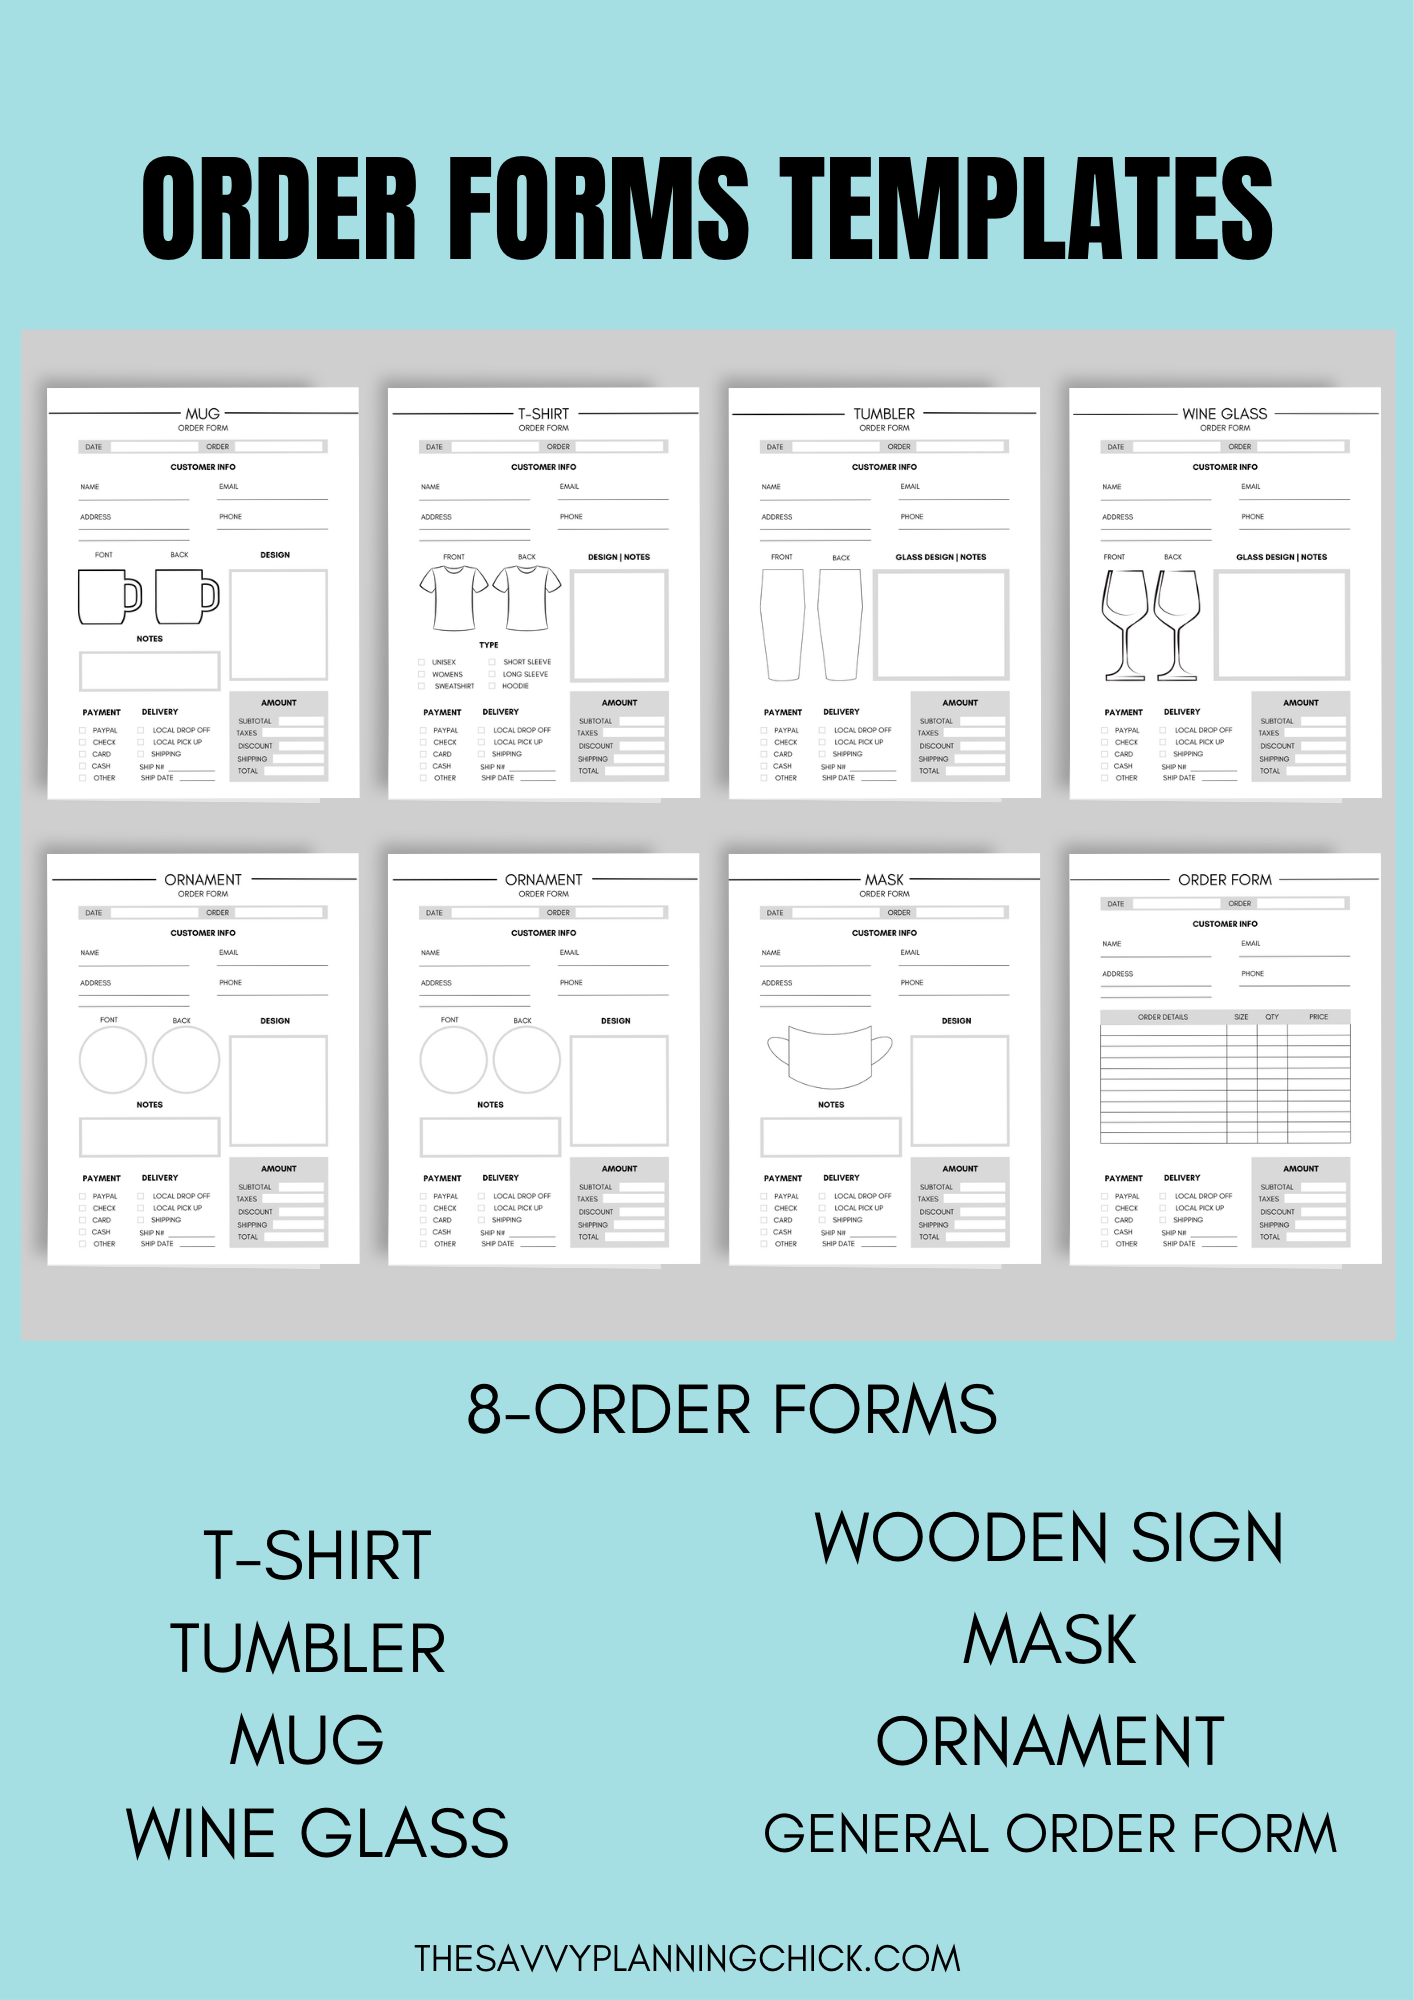 PRODUCT ORDER FORMS TEMPLATES